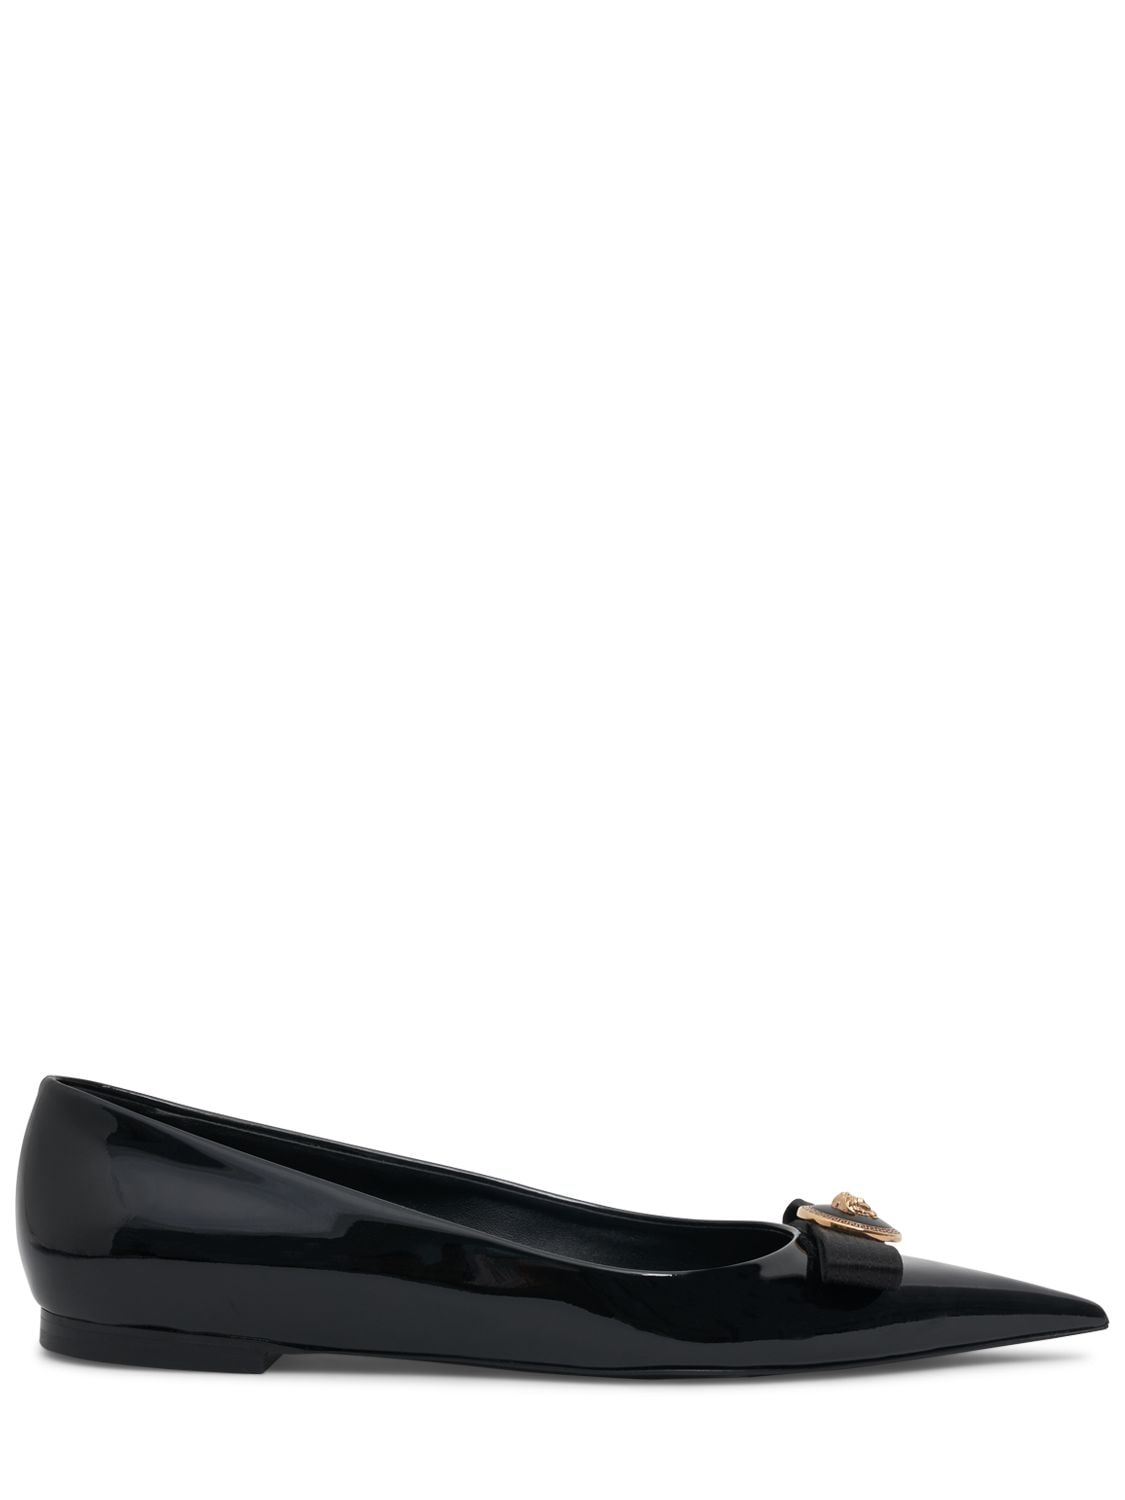 Image of Leather Flats Shoes